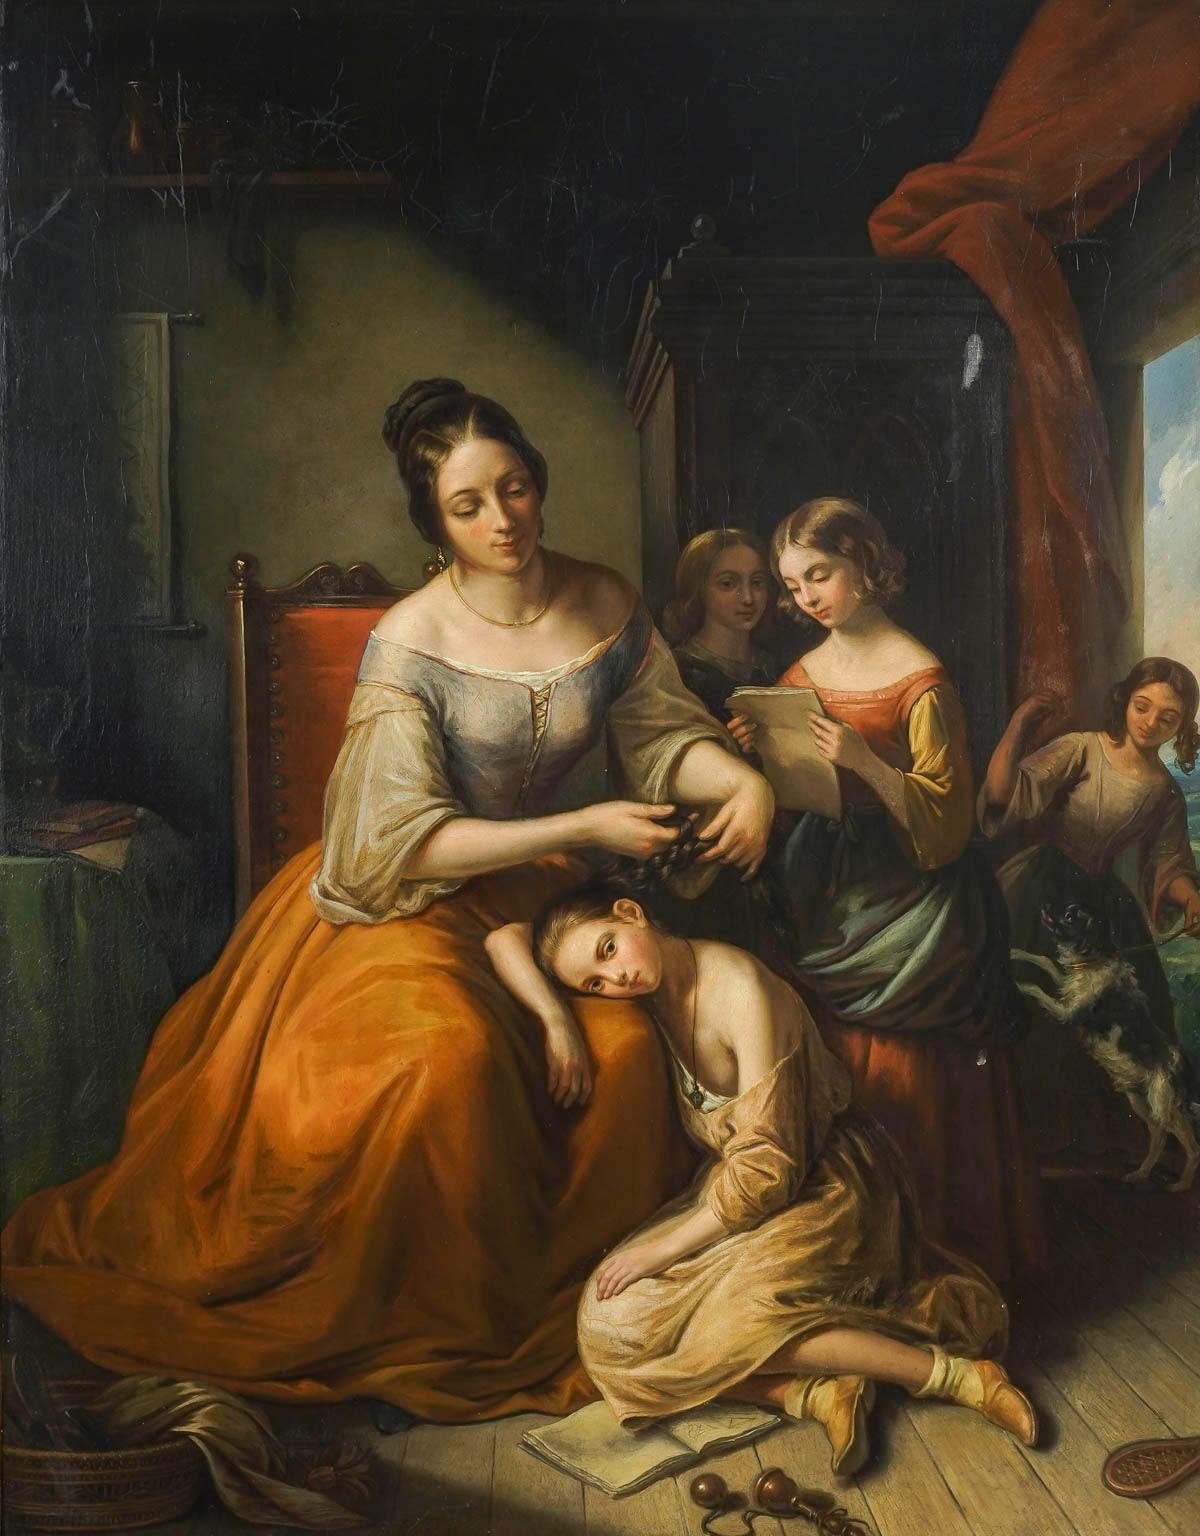 Oil on canvas, 19th century, Napoleon III period.

Oil on canvas, beautiful 19th century painting representing an interior scene of a mother with her daughters, Napoleon III period, nice period wood and gilded stucco frame.  
Canvas: h: 88cm, w: